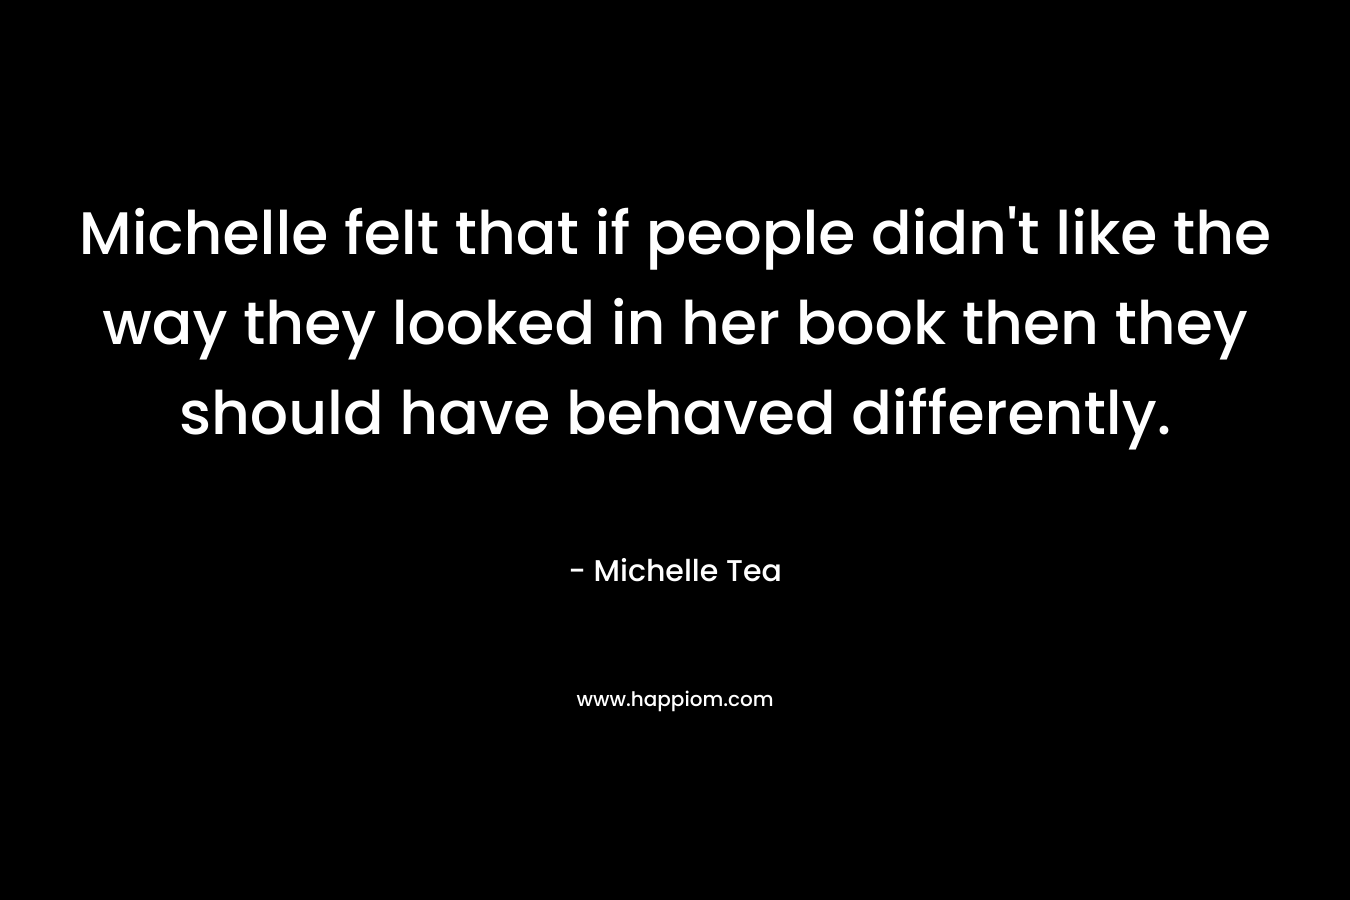 Michelle felt that if people didn't like the way they looked in her book then they should have behaved differently.